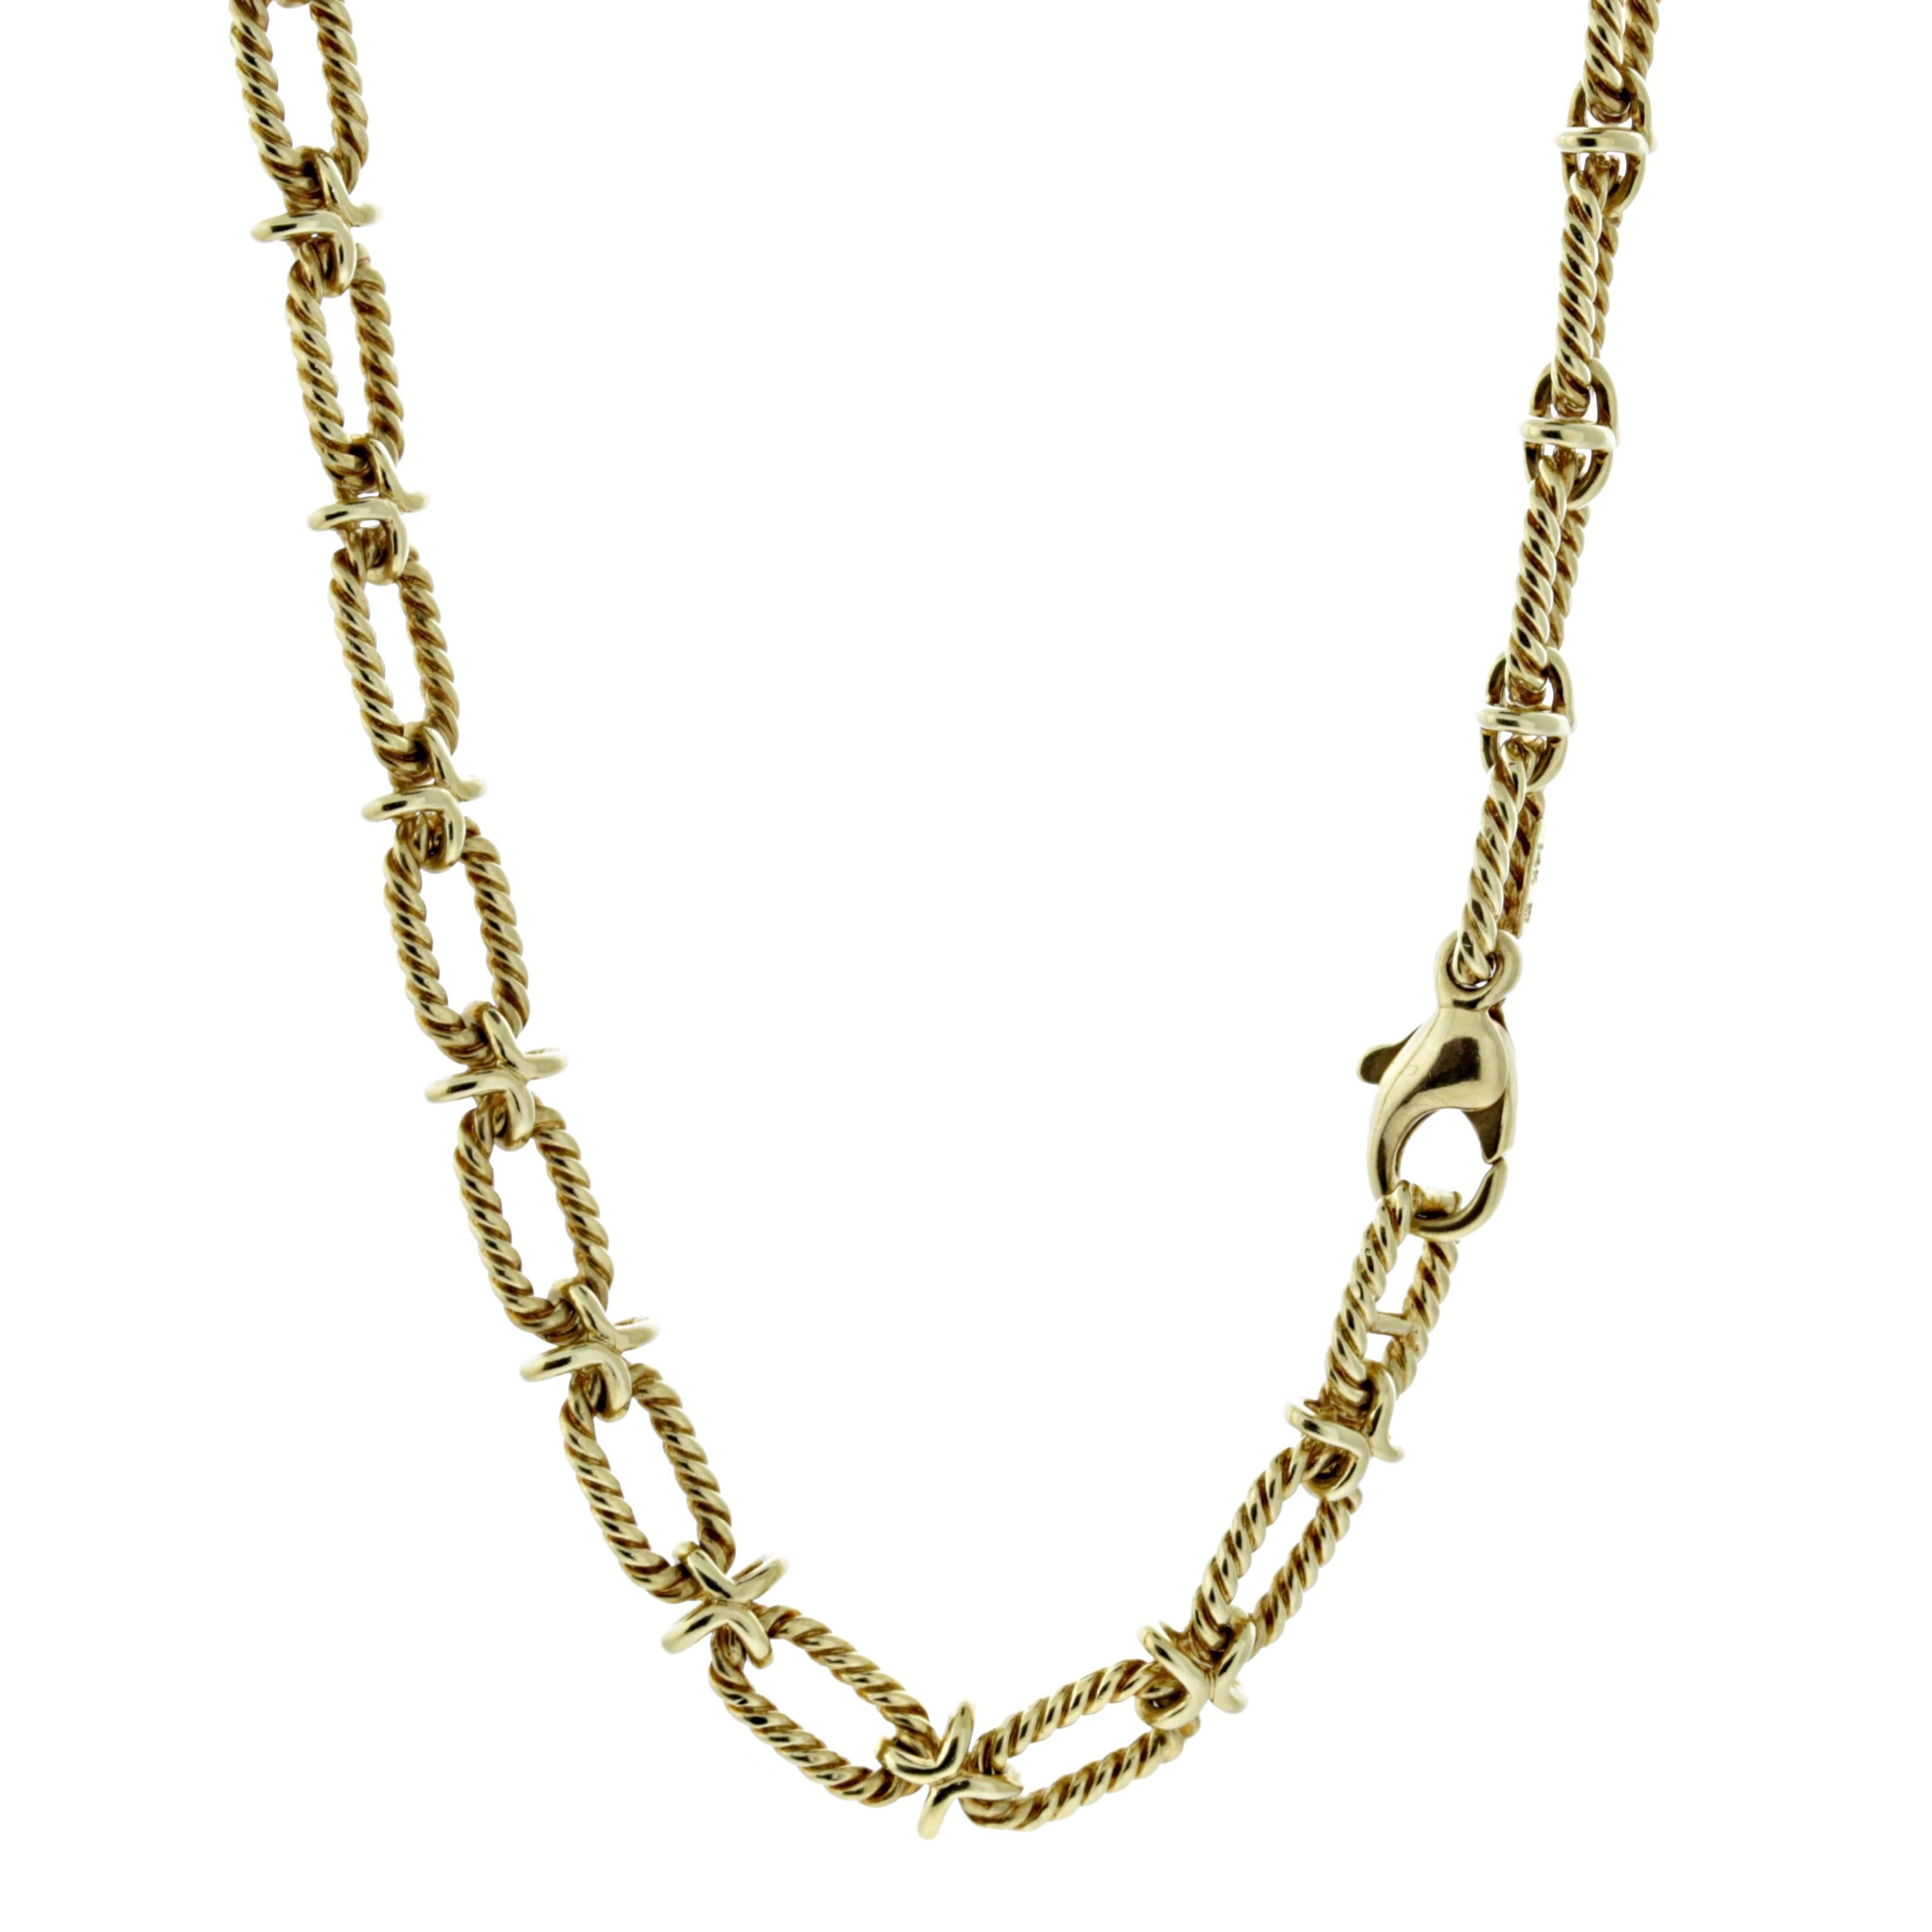 A unique Tiffany & Co Sautoir necklace featuring a braided design crafted in 18k yellow gold. The necklace may be worn as a sautoir or doubled as a choker.

Necklace Length: 30